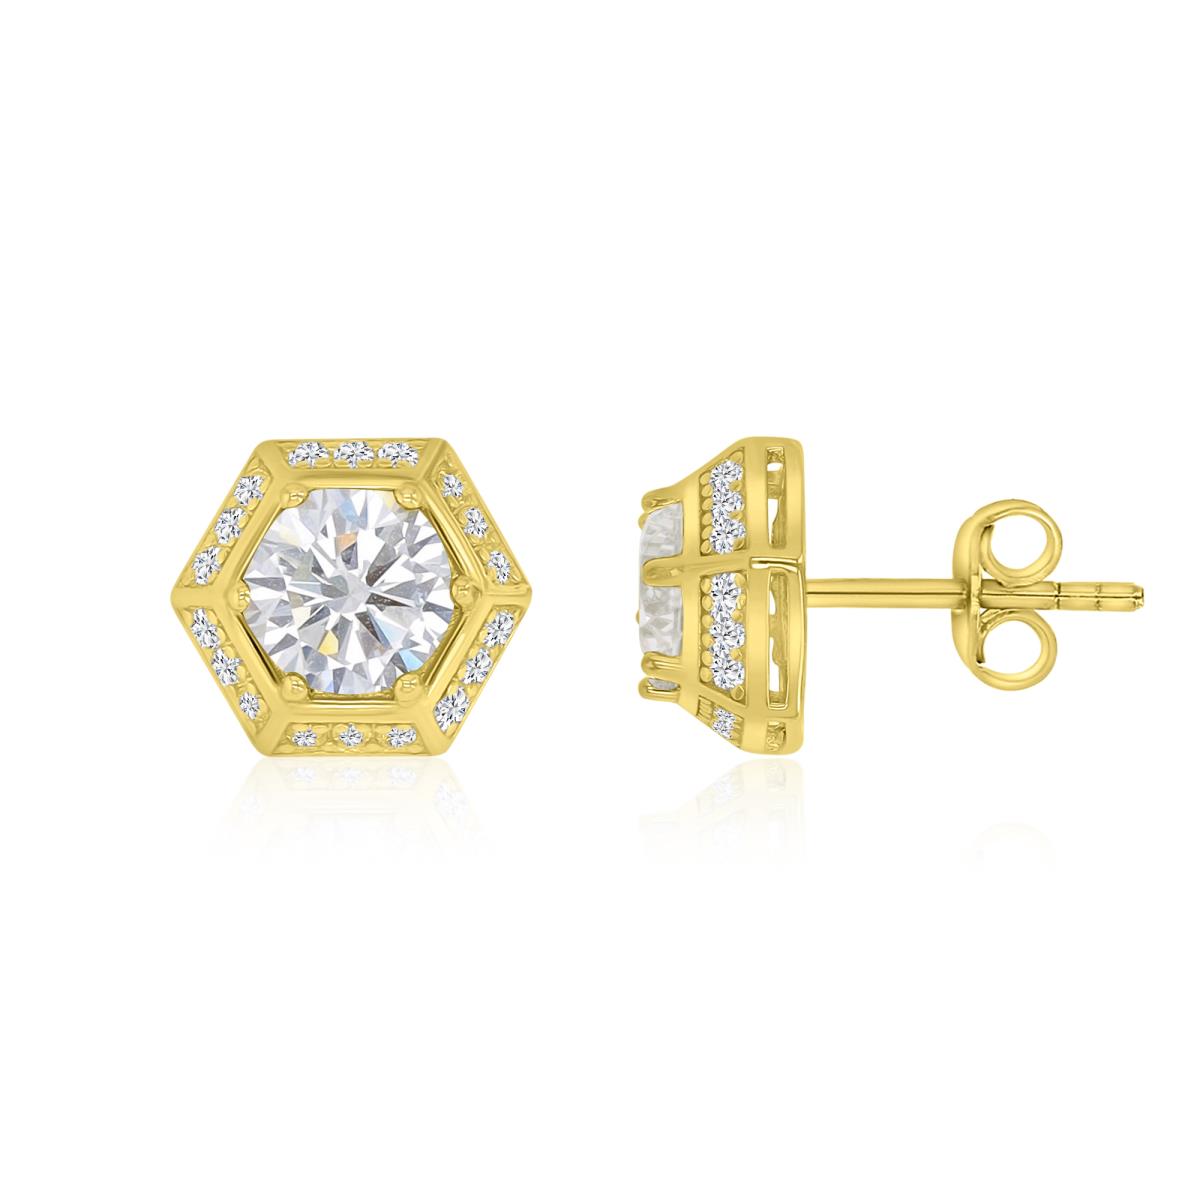 Sterling Silver Yellow 9X5MM Polished White CZ Octagon Stud Earrings